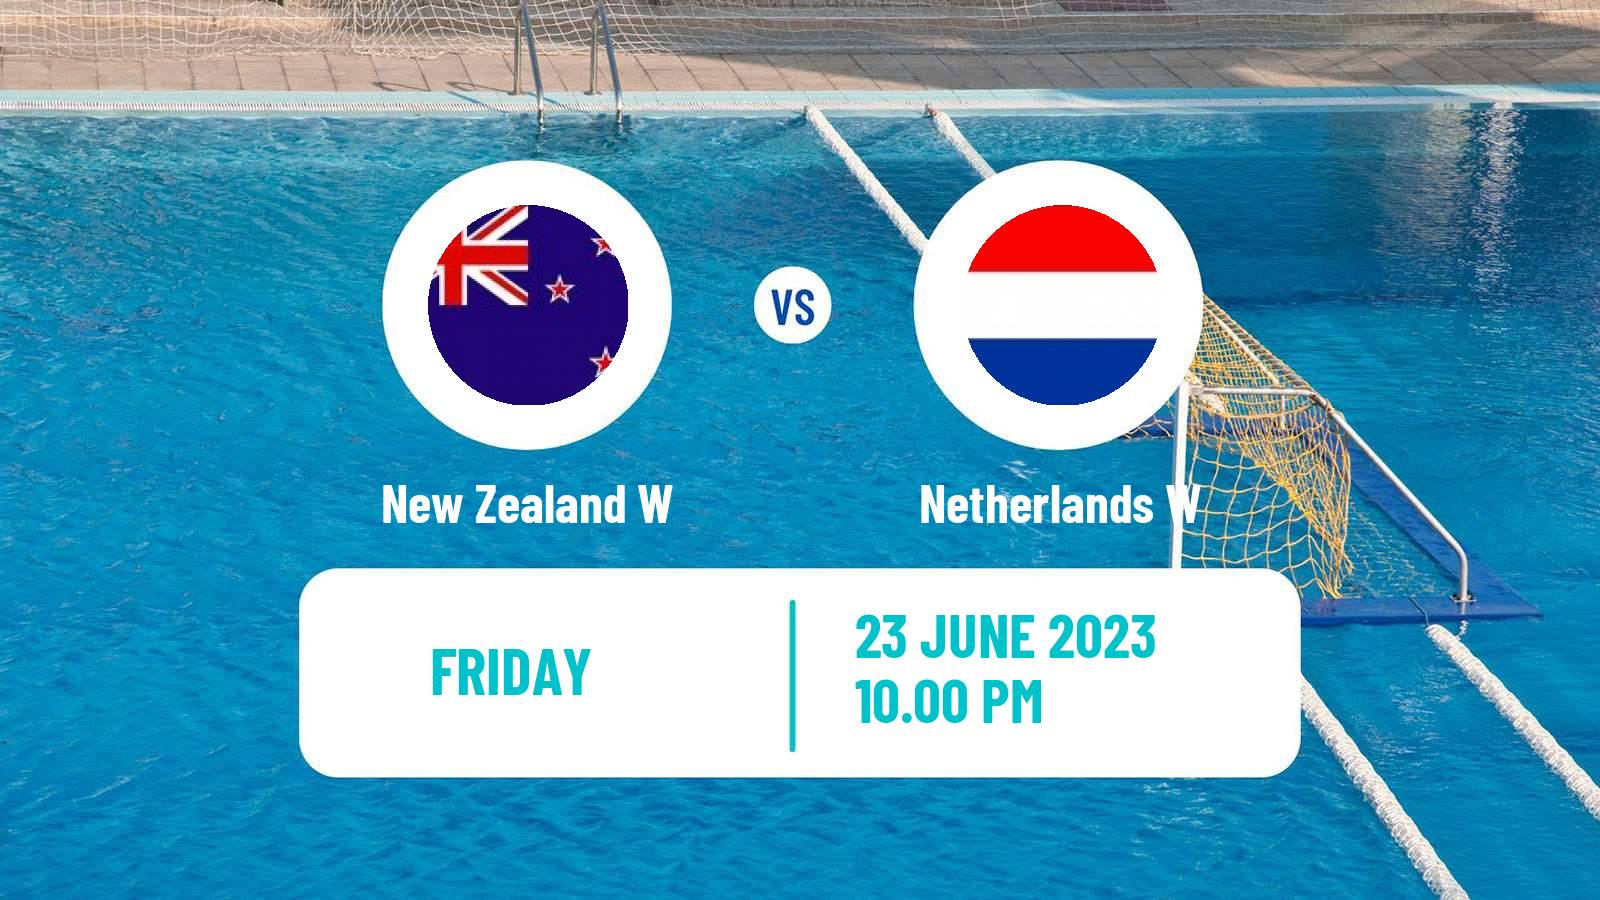 Water polo World Cup Water Polo Women New Zealand W - Netherlands W